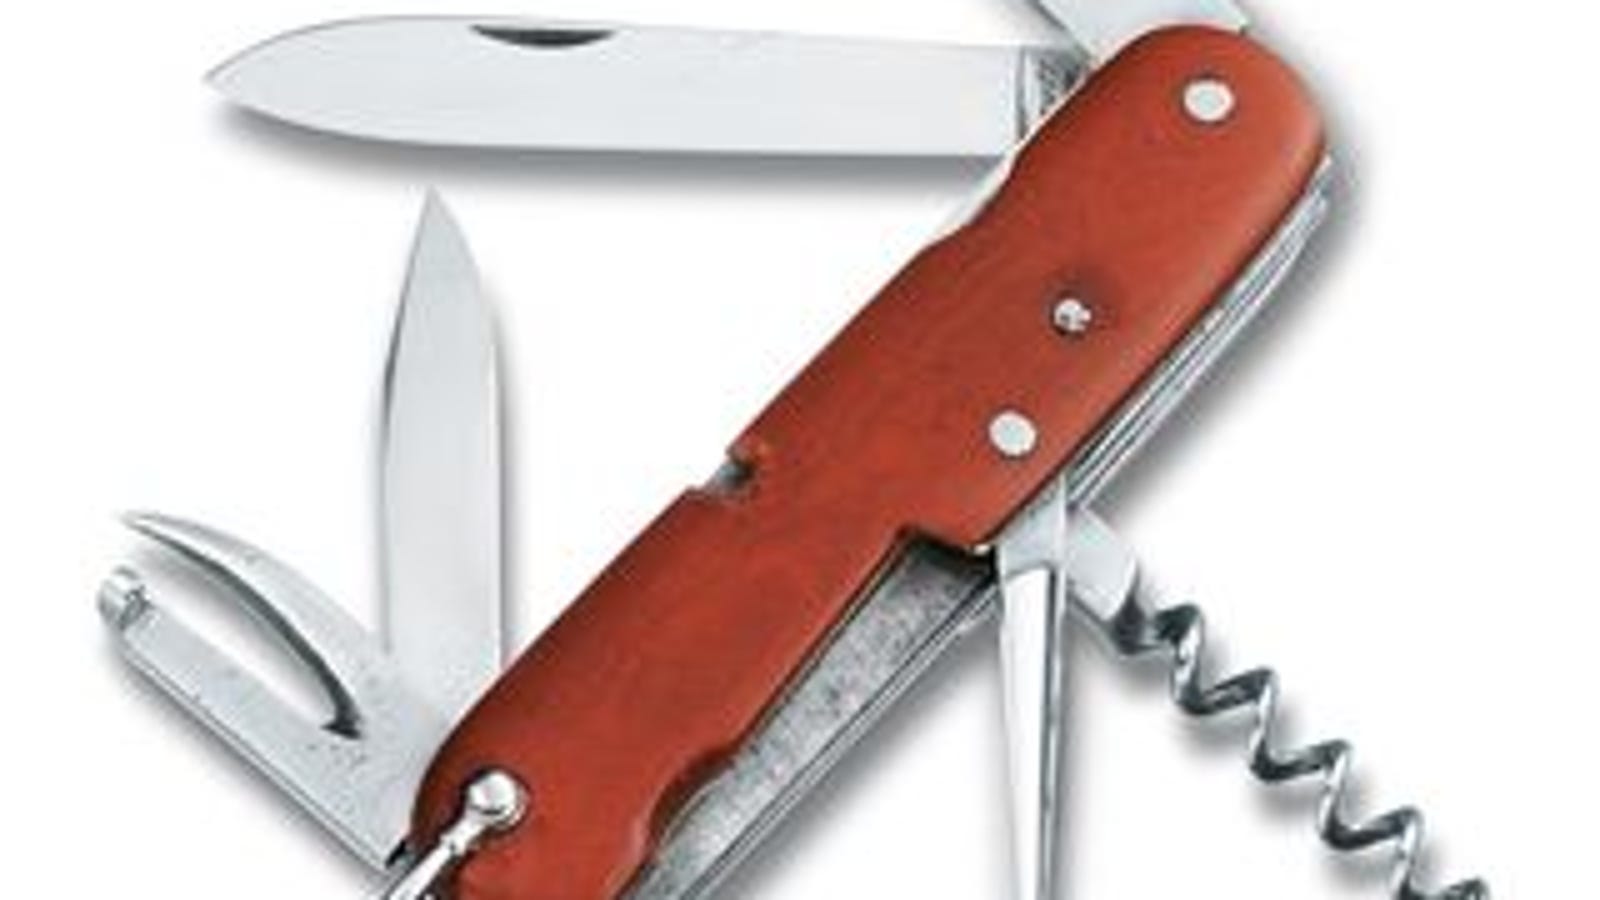 History of the Swiss Army Knife